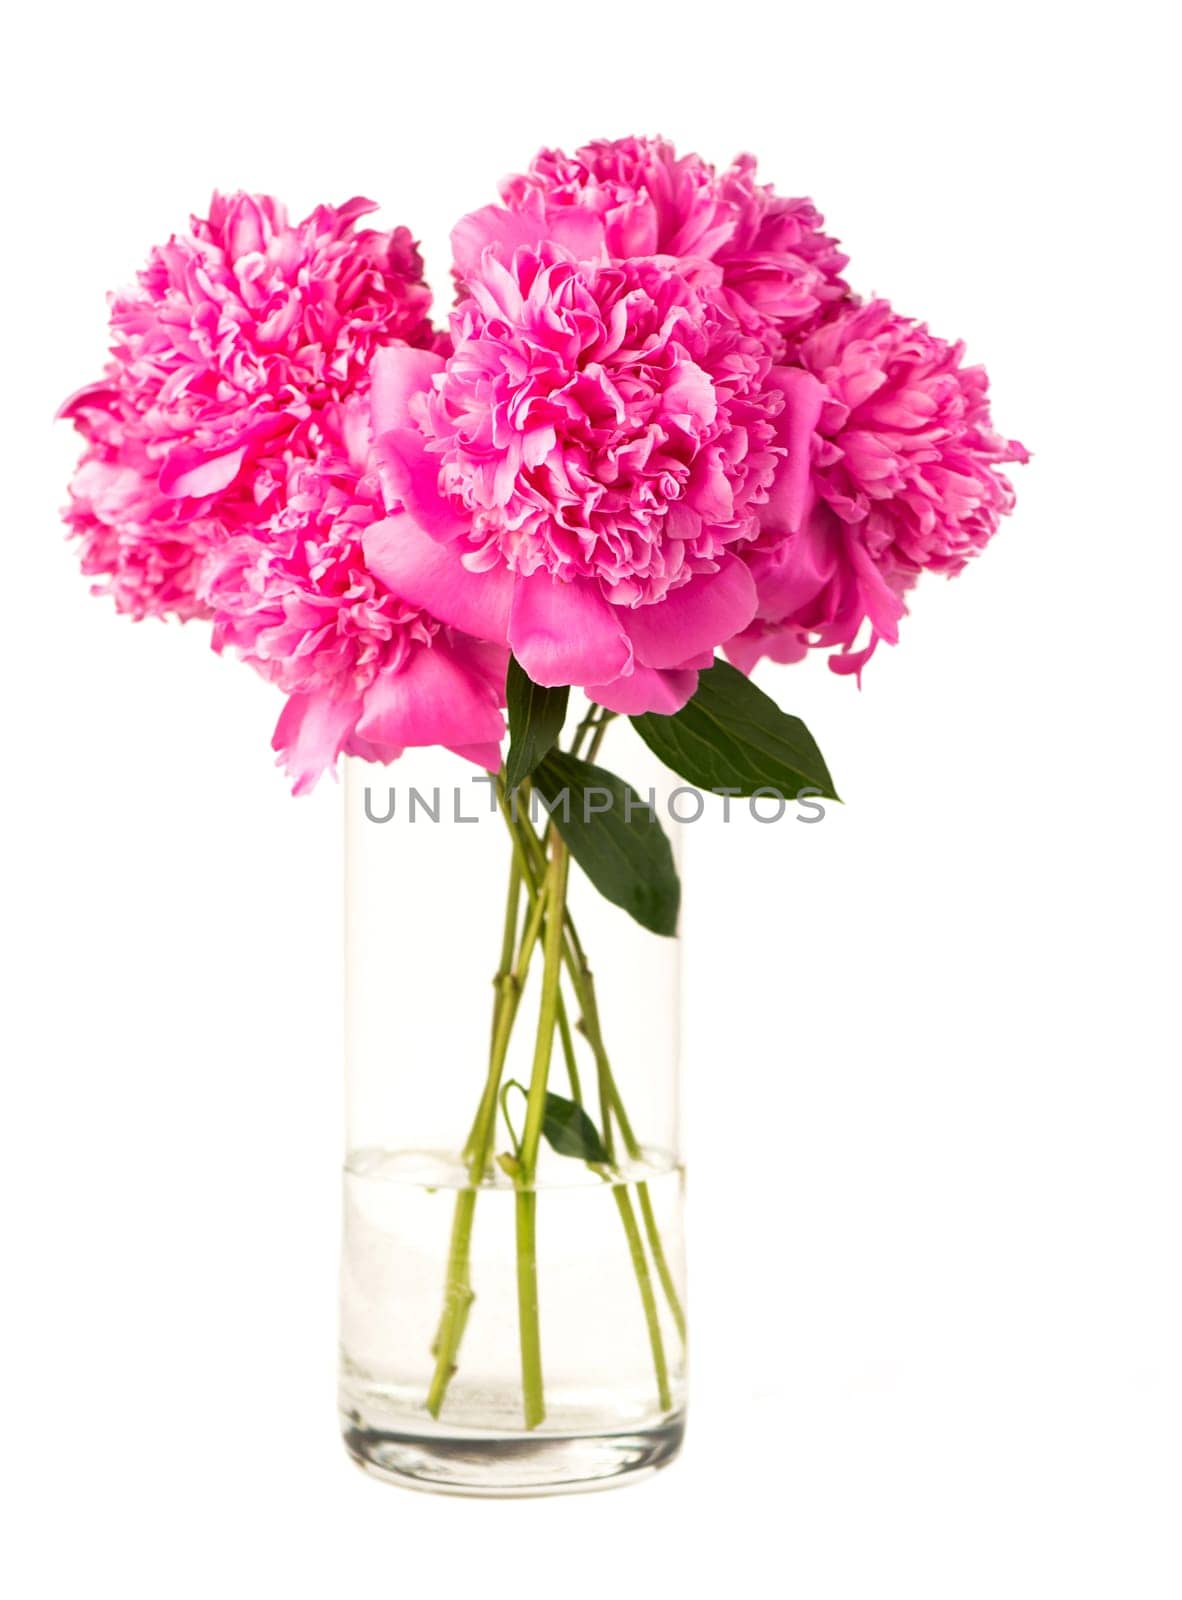 Beautiful pink peony. Blooming peony flower is open, close-up. Wedding background, Valentine's day concept.